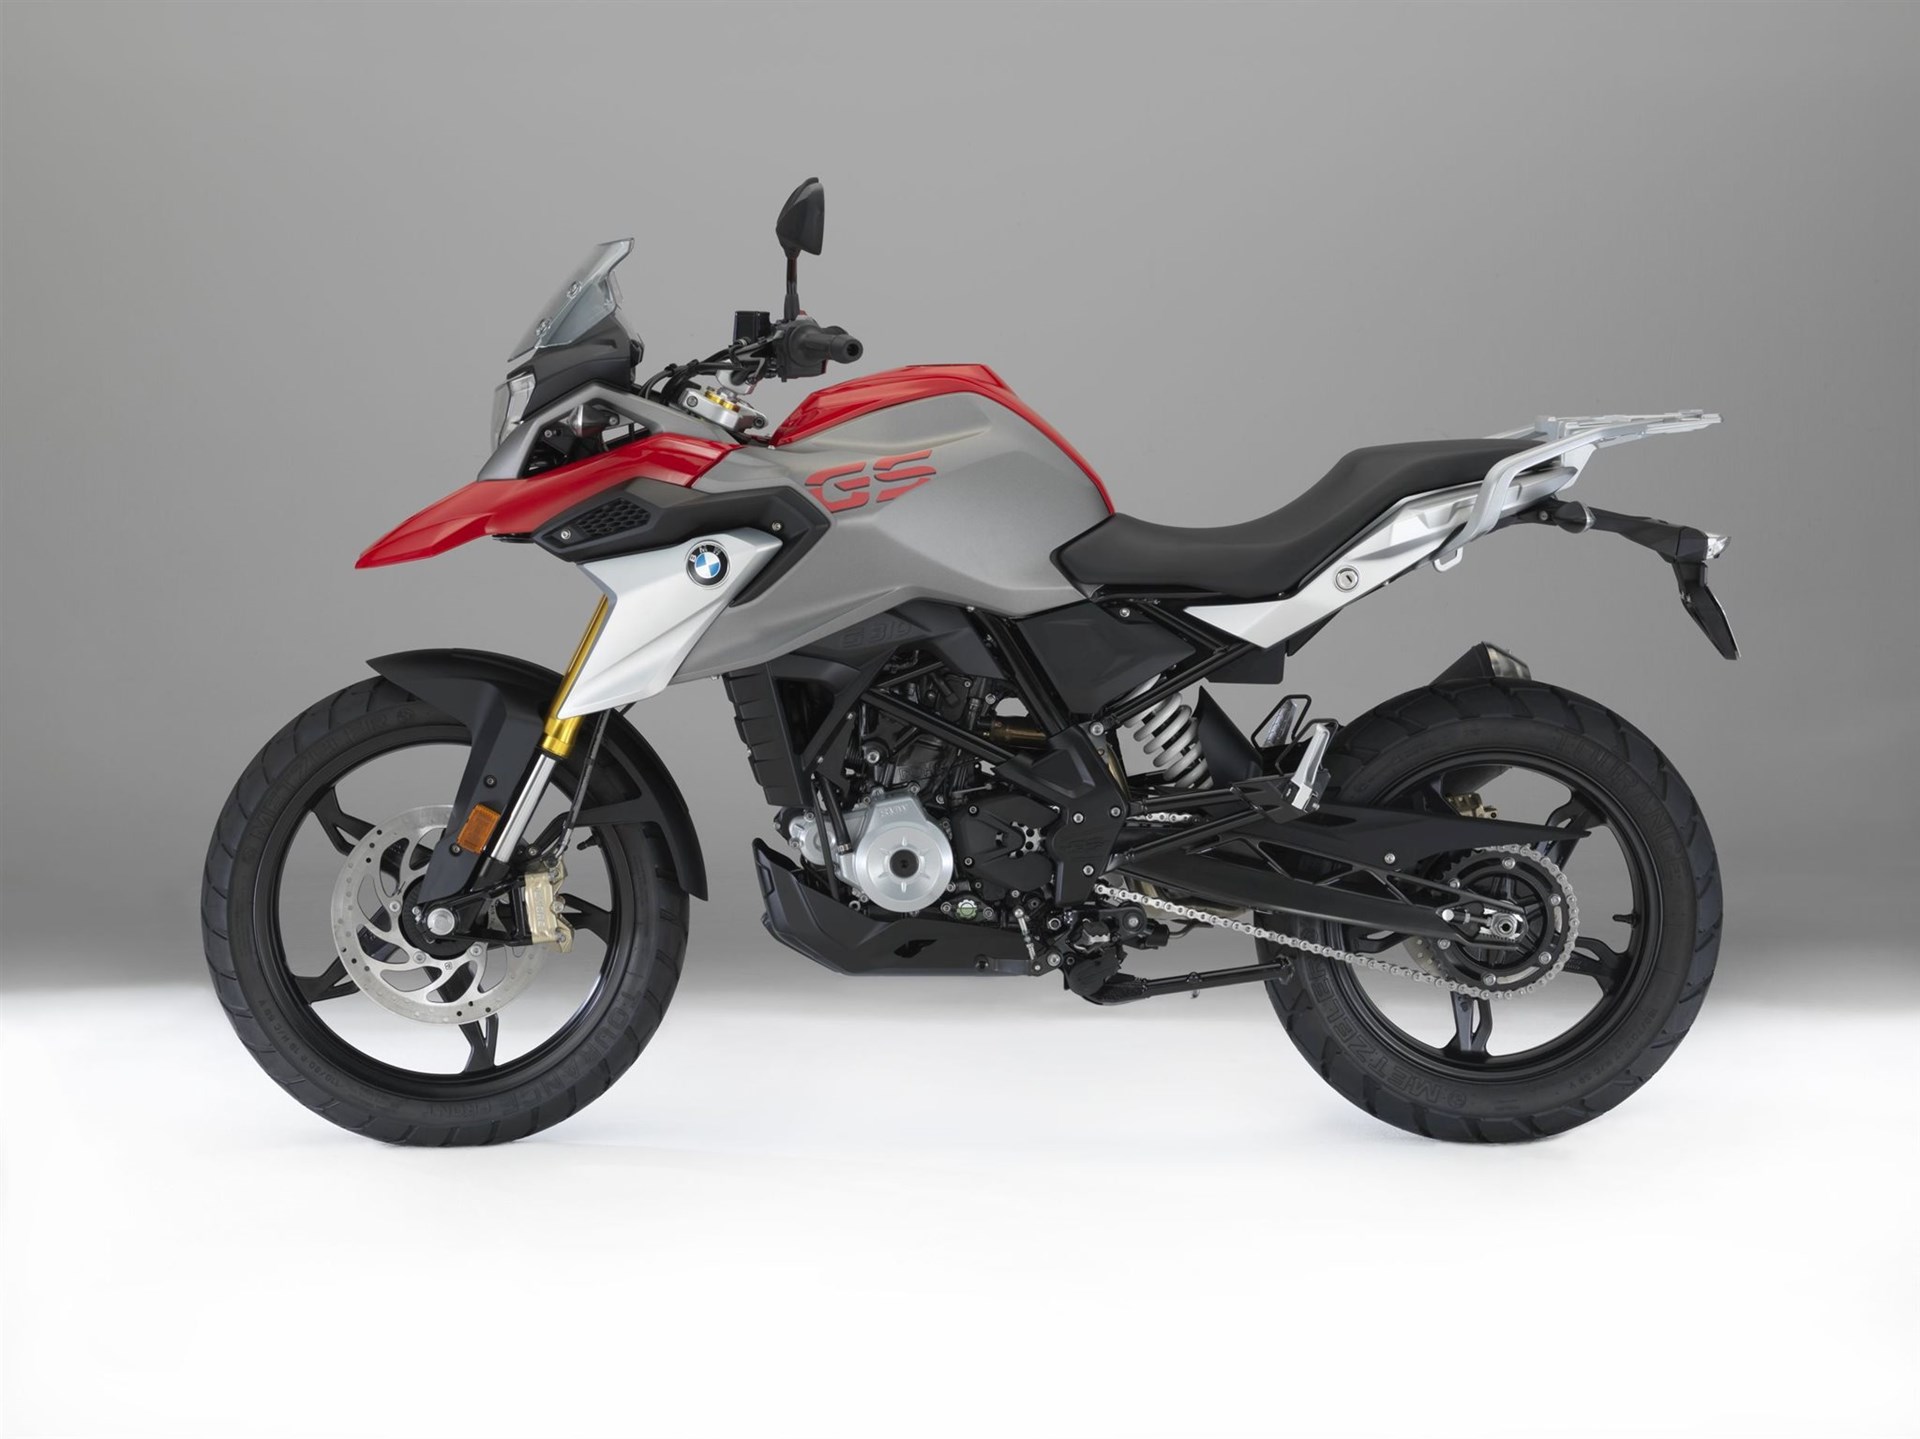 BMW G 310 GS - Pictures › Motorcycles.News - Motorcycle 